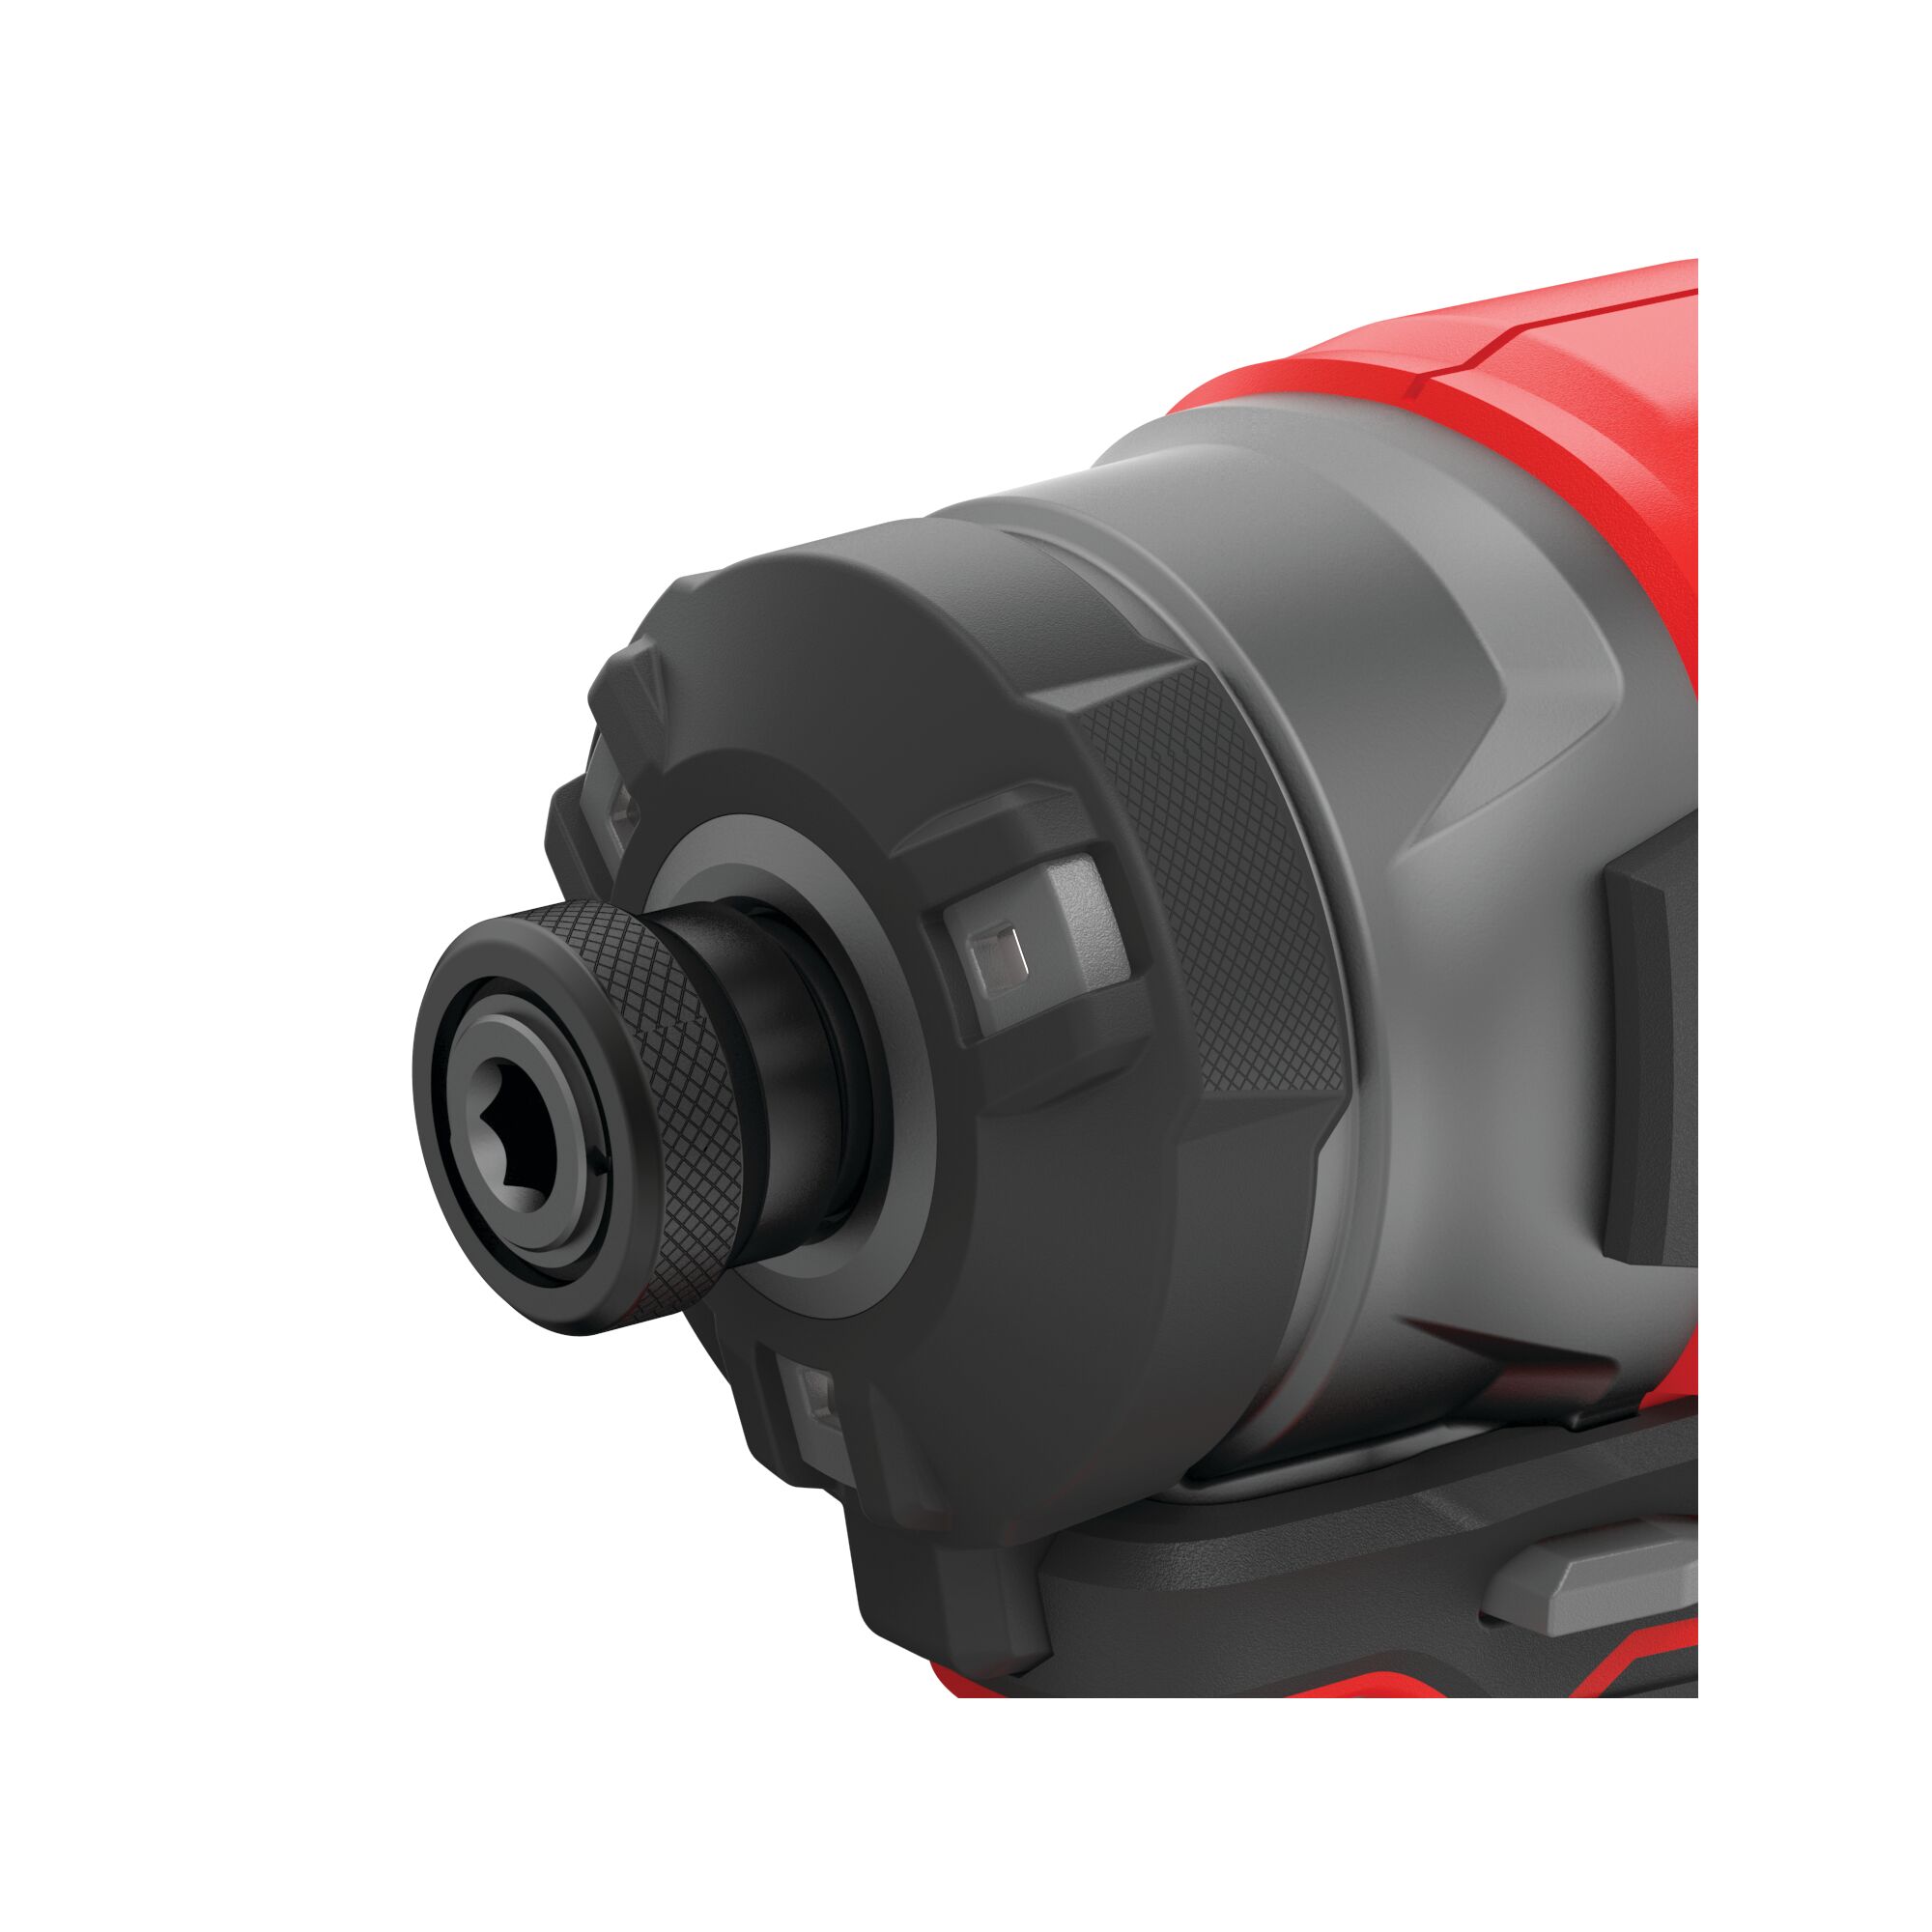 quickly release chuck feature of brushless cordless impact driver 2 batteries.